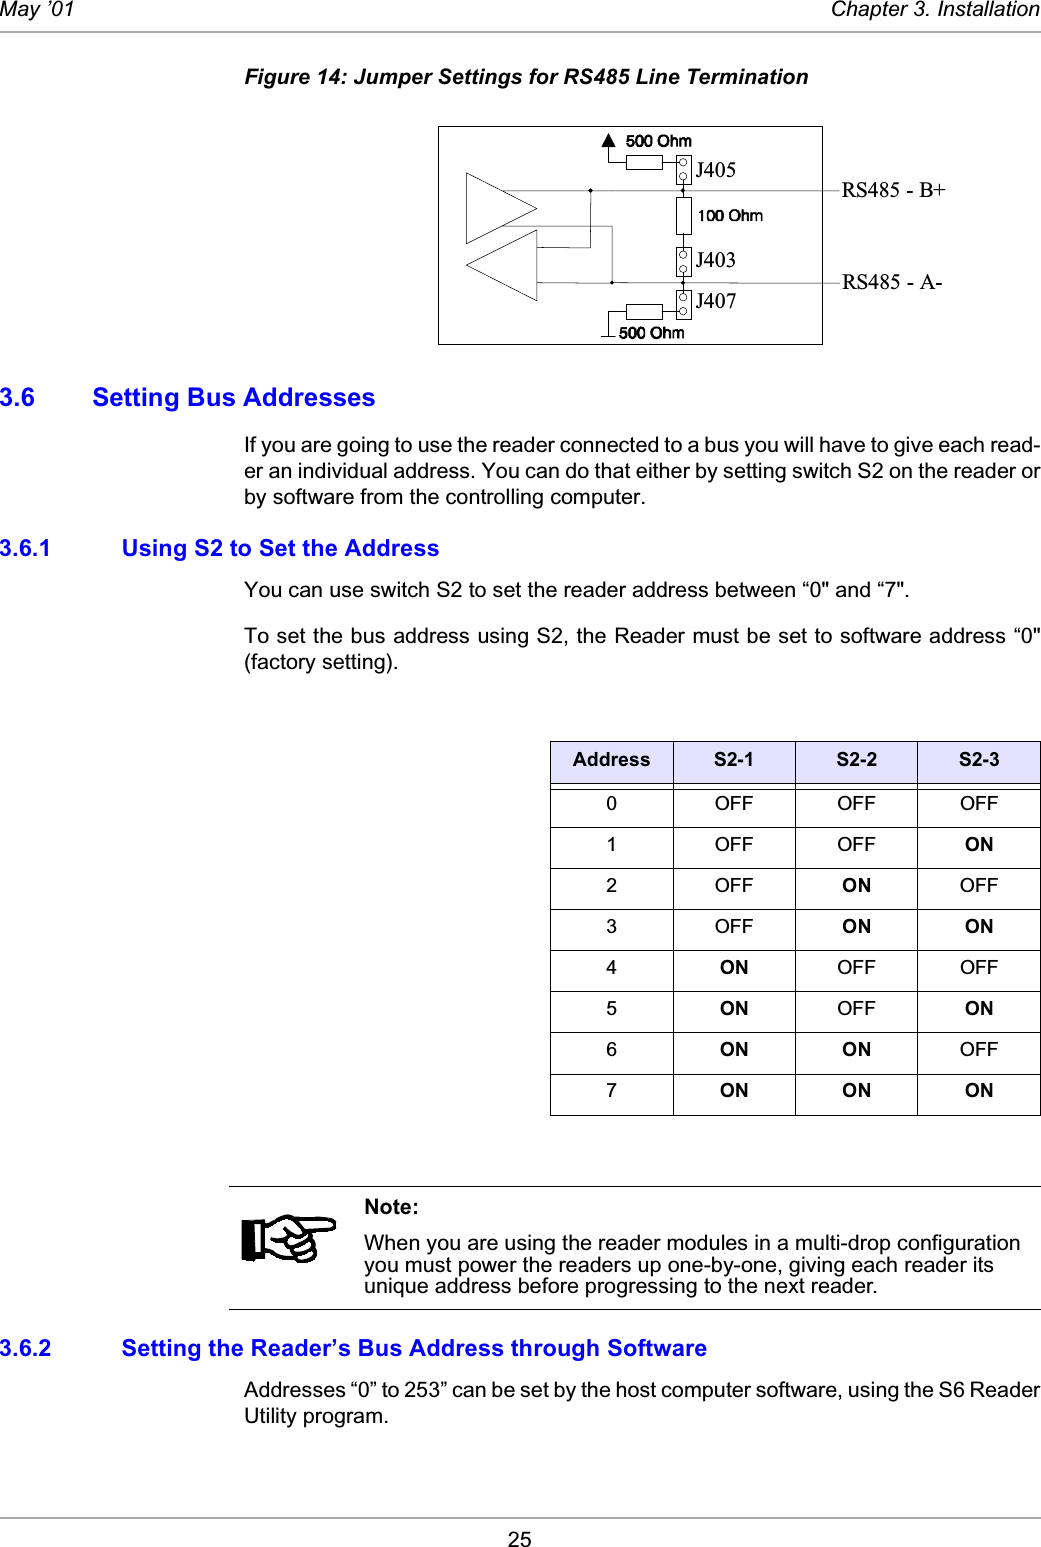 25May ’01 Chapter 3. InstallationFigure 14: Jumper Settings for RS485 Line Termination3.6 Setting Bus AddressesIf you are going to use the reader connected to a bus you will have to give each read-er an individual address. You can do that either by setting switch S2 on the reader orby software from the controlling computer. 3.6.1 Using S2 to Set the AddressYou can use switch S2 to set the reader address between “0&quot; and “7&quot;.To set the bus address using S2, the Reader must be set to software address “0&quot;(factory setting).3.6.2 Setting the Reader’s Bus Address through SoftwareAddresses “0” to 253” can be set by the host computer software, using the S6 ReaderUtility program. Address S2-1 S2-2 S2-30 OFF OFF OFF1OFFOFFON2OFFON OFF3OFFON ON4ON OFF OFF5ON OFF ON6ON ON OFF7ON ON ONNote:When you are using the reader modules in a multi-drop configuration you must power the readers up one-by-one, giving each reader its unique address before progressing to the next reader. J405J403J407RS485 - B+RS485 - A-